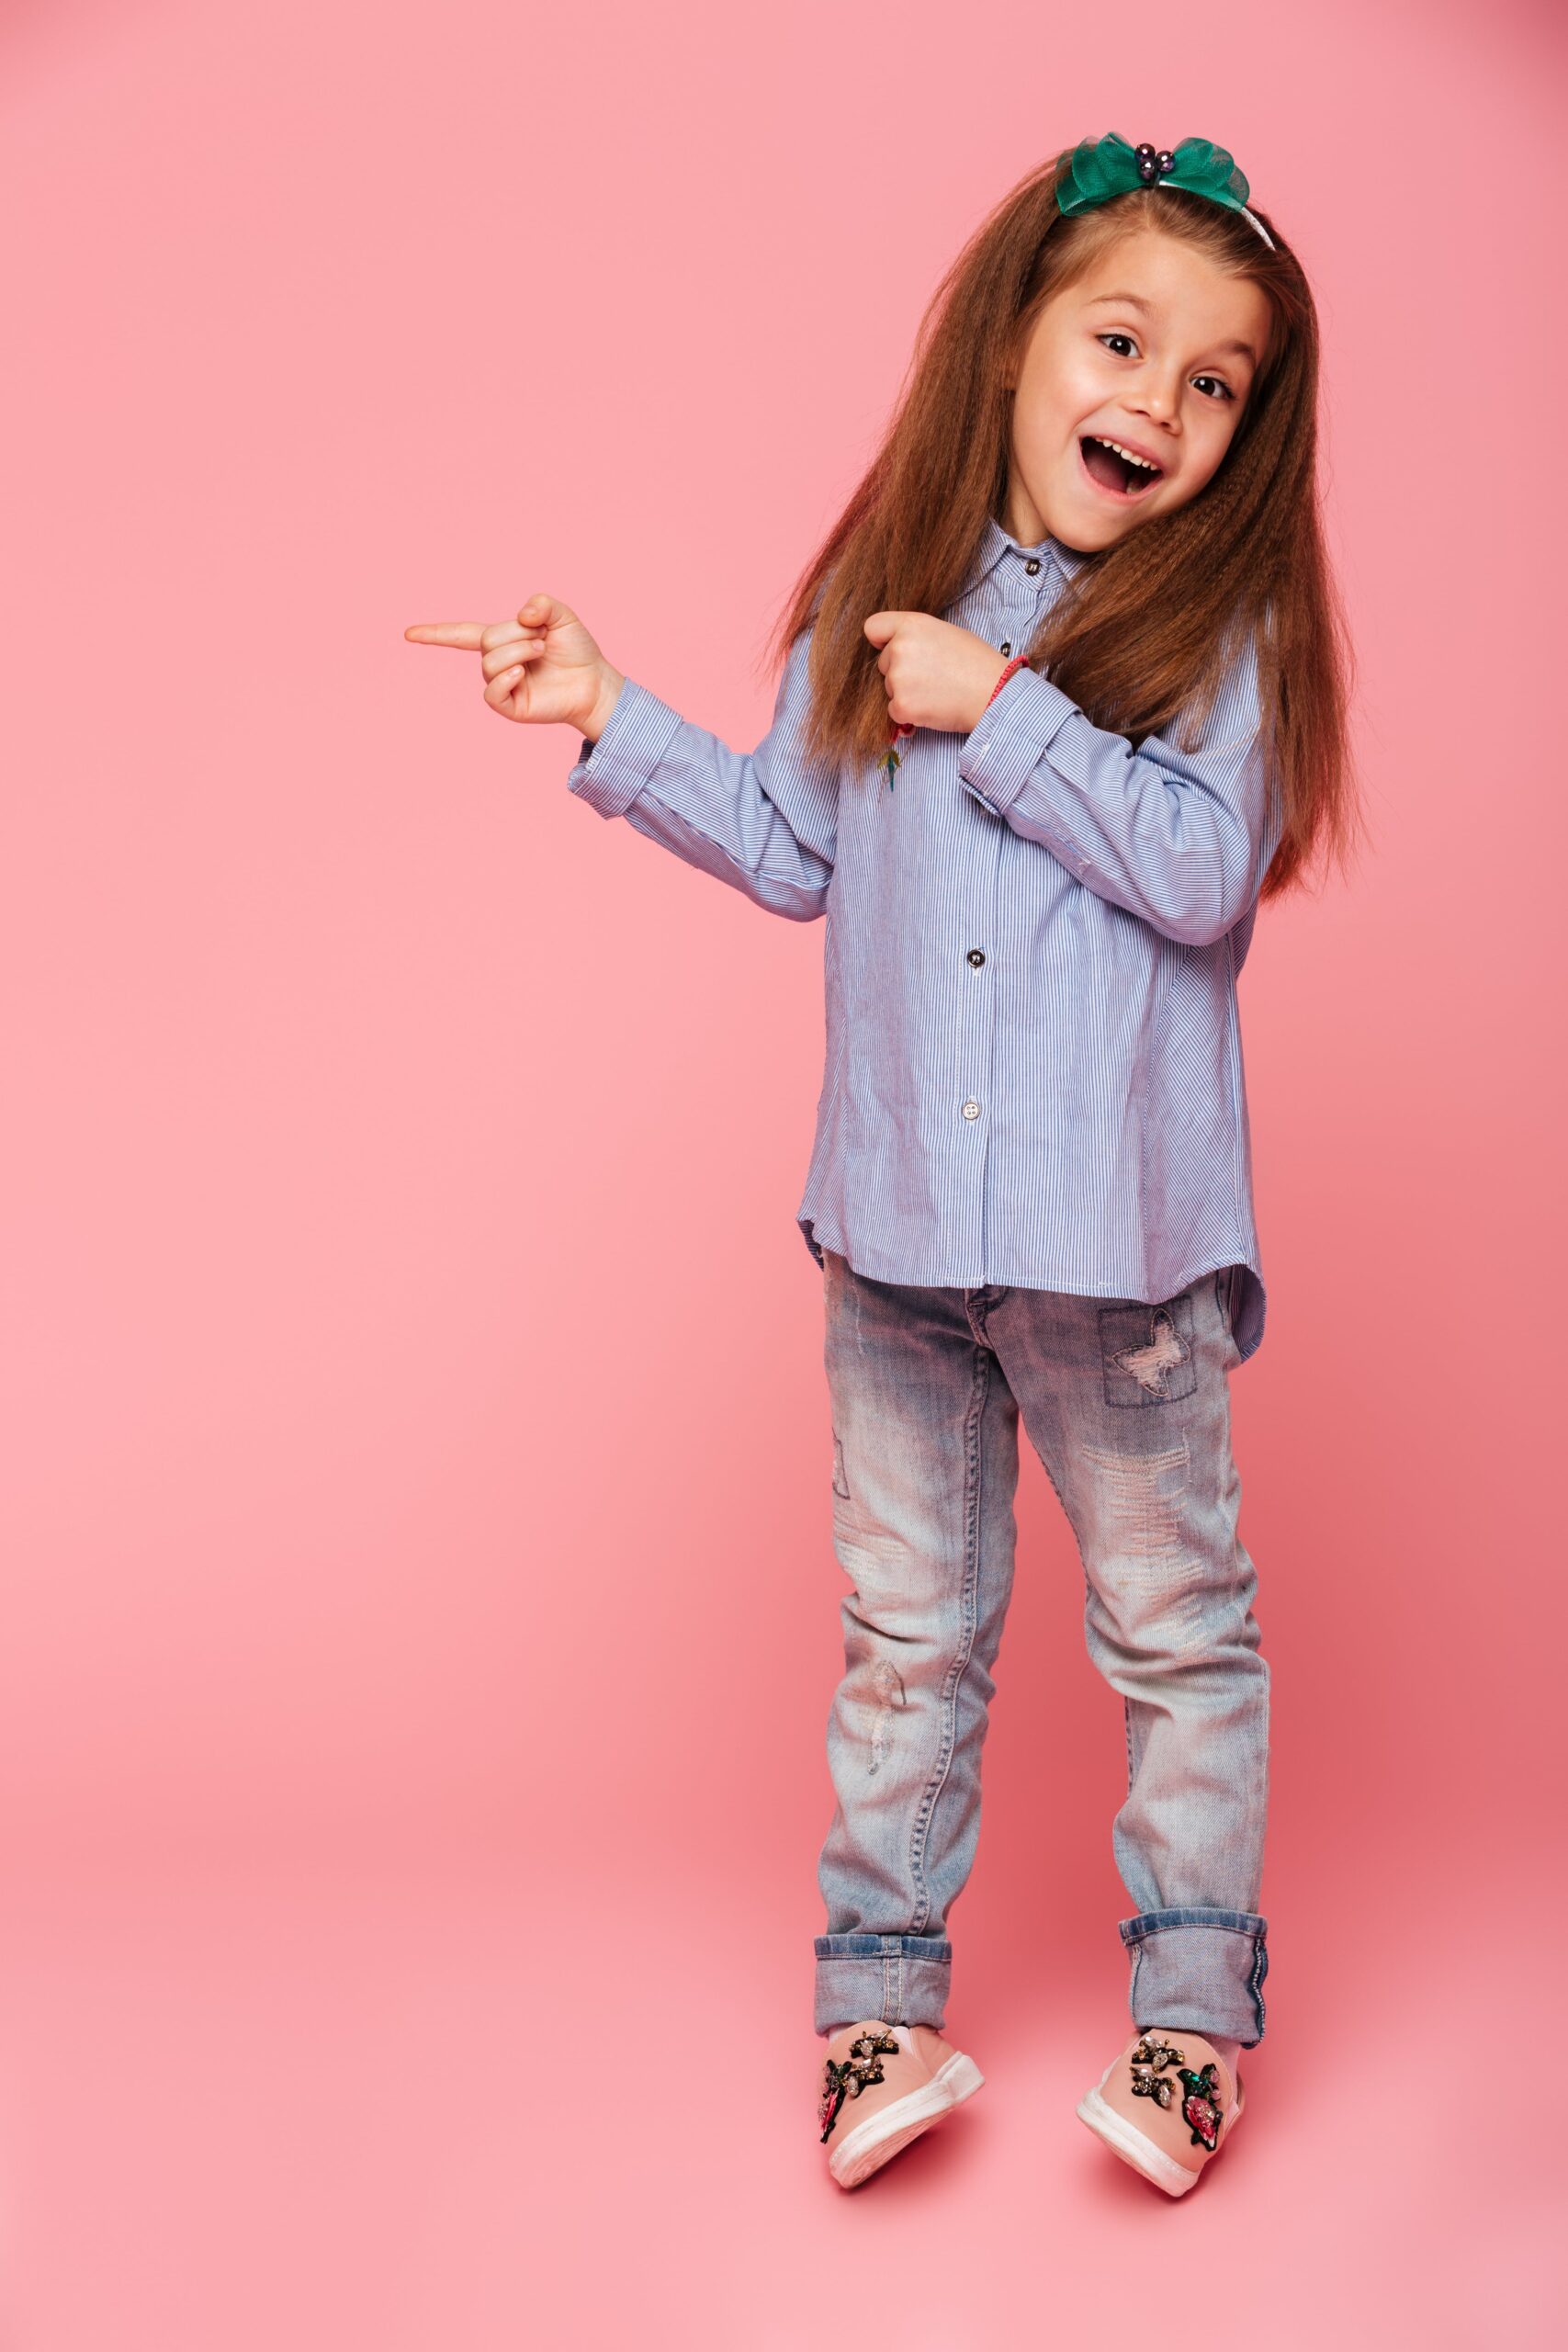 full-length-picture-funny-little-girl-gesturing-pointing-index-finger-copy-space-your-text-product-min (1)